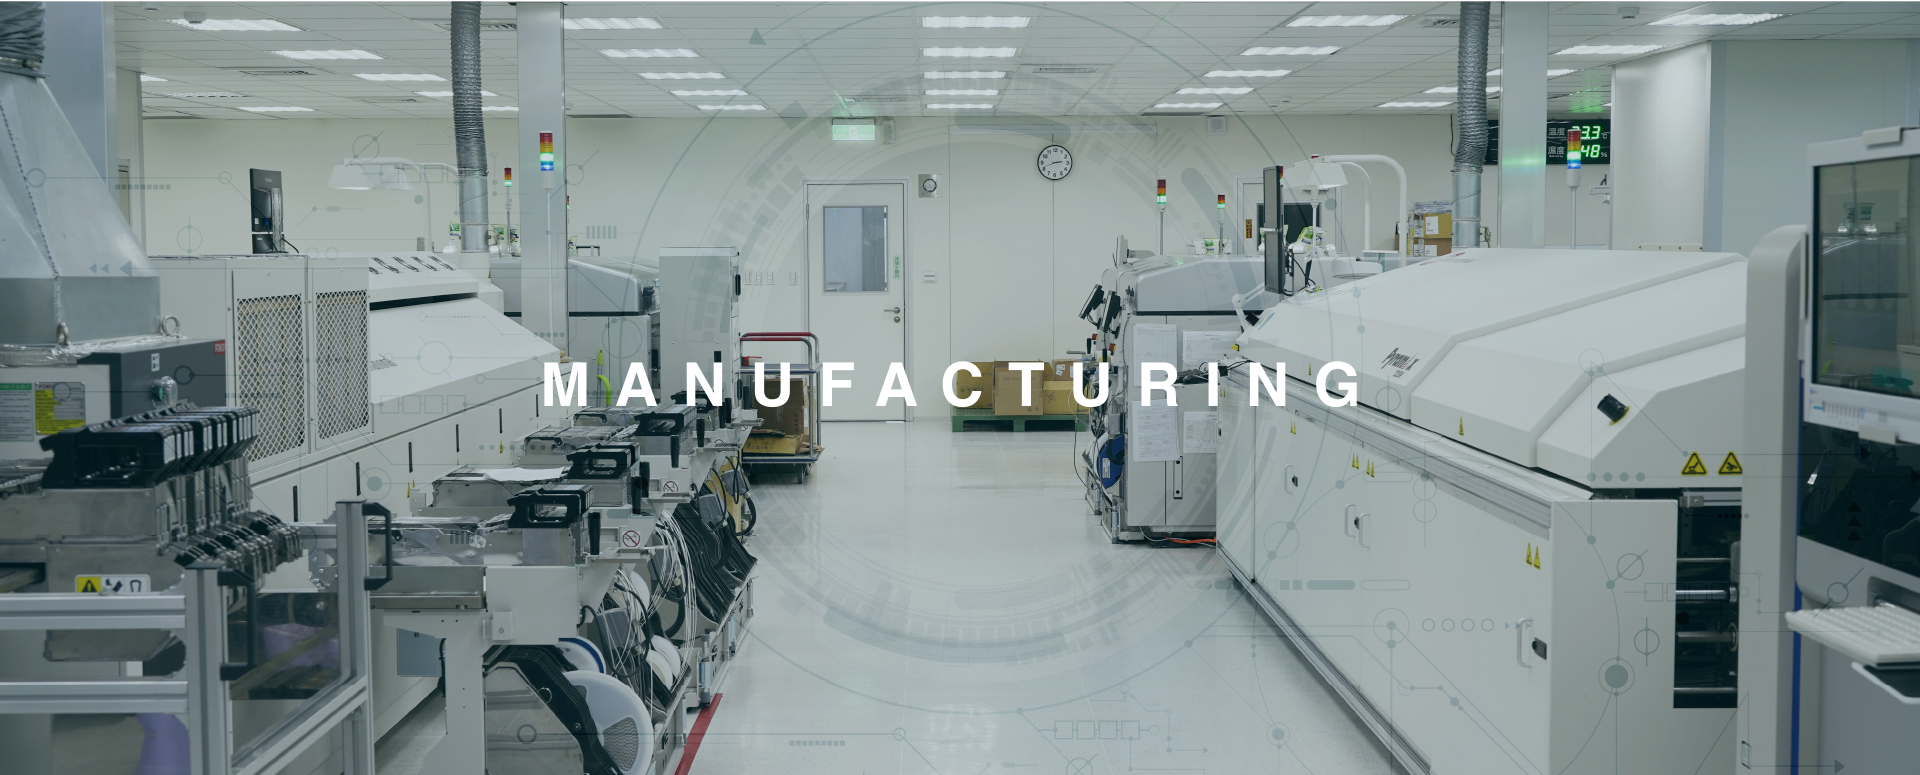 Title-Manufacturing